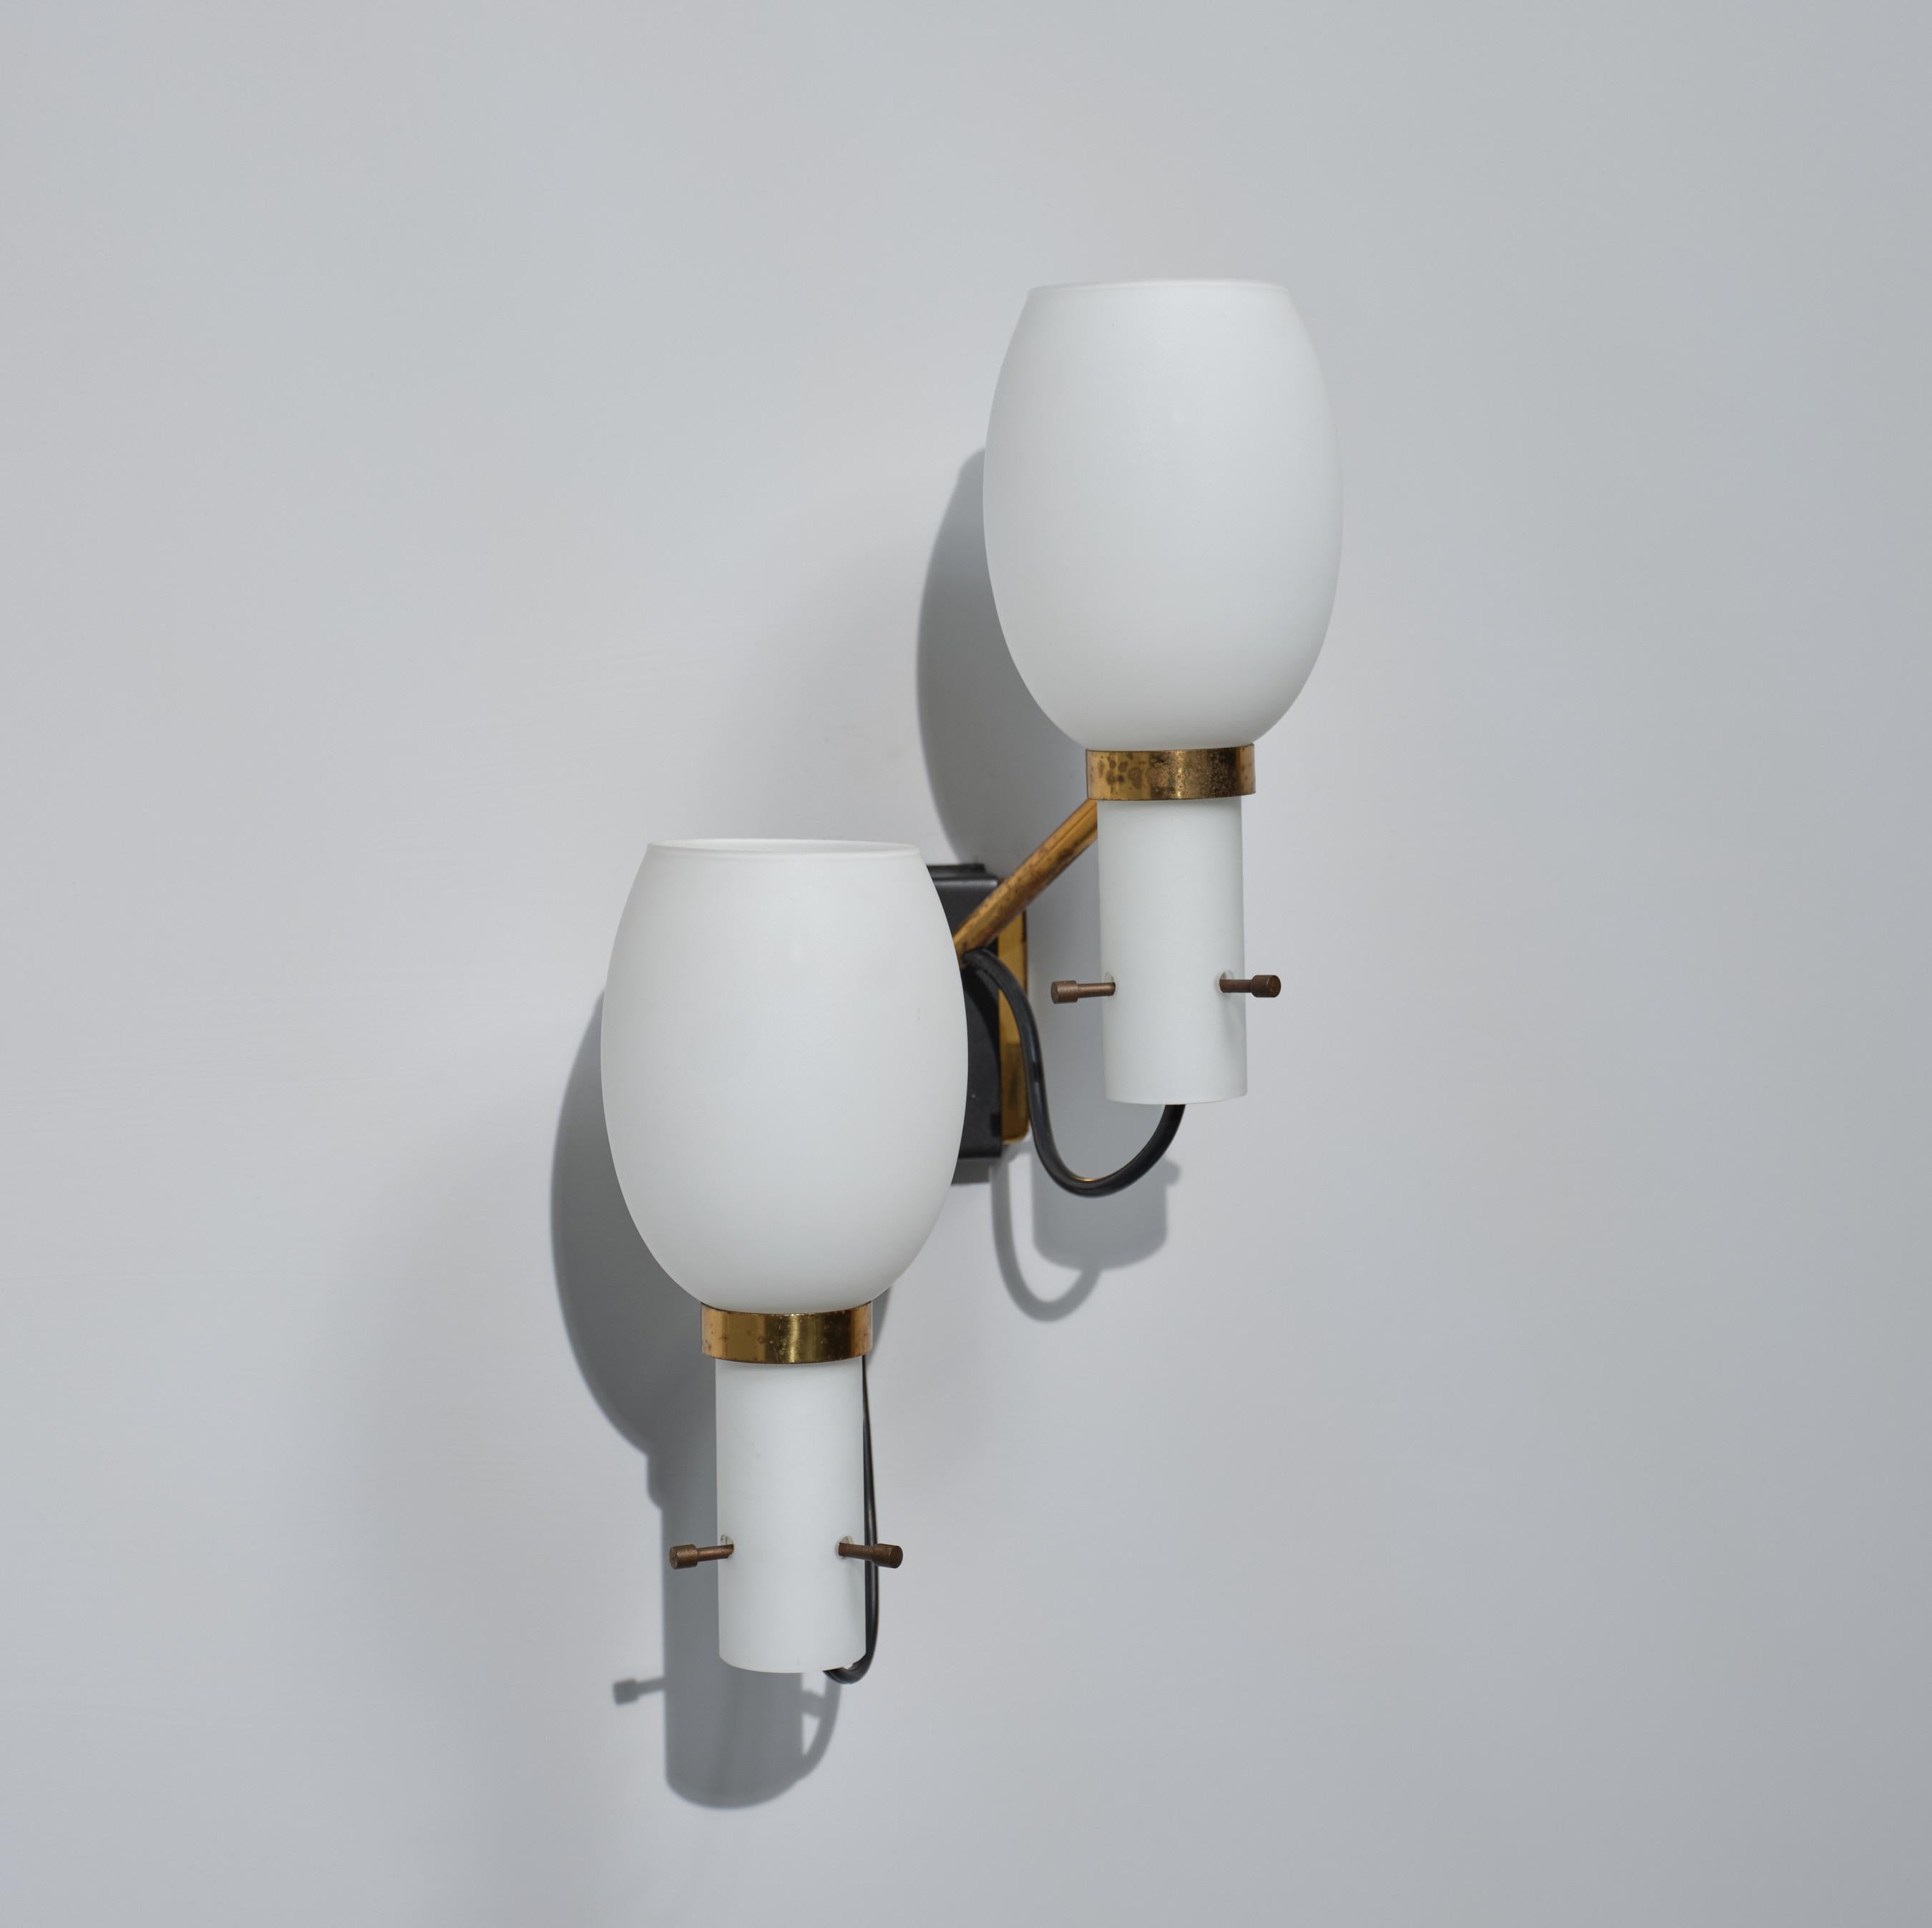 Exquisite Pair of Italian Mid-Century Modern Wall Sconces with Dual Light Source In Good Condition For Sale In Rome, IT